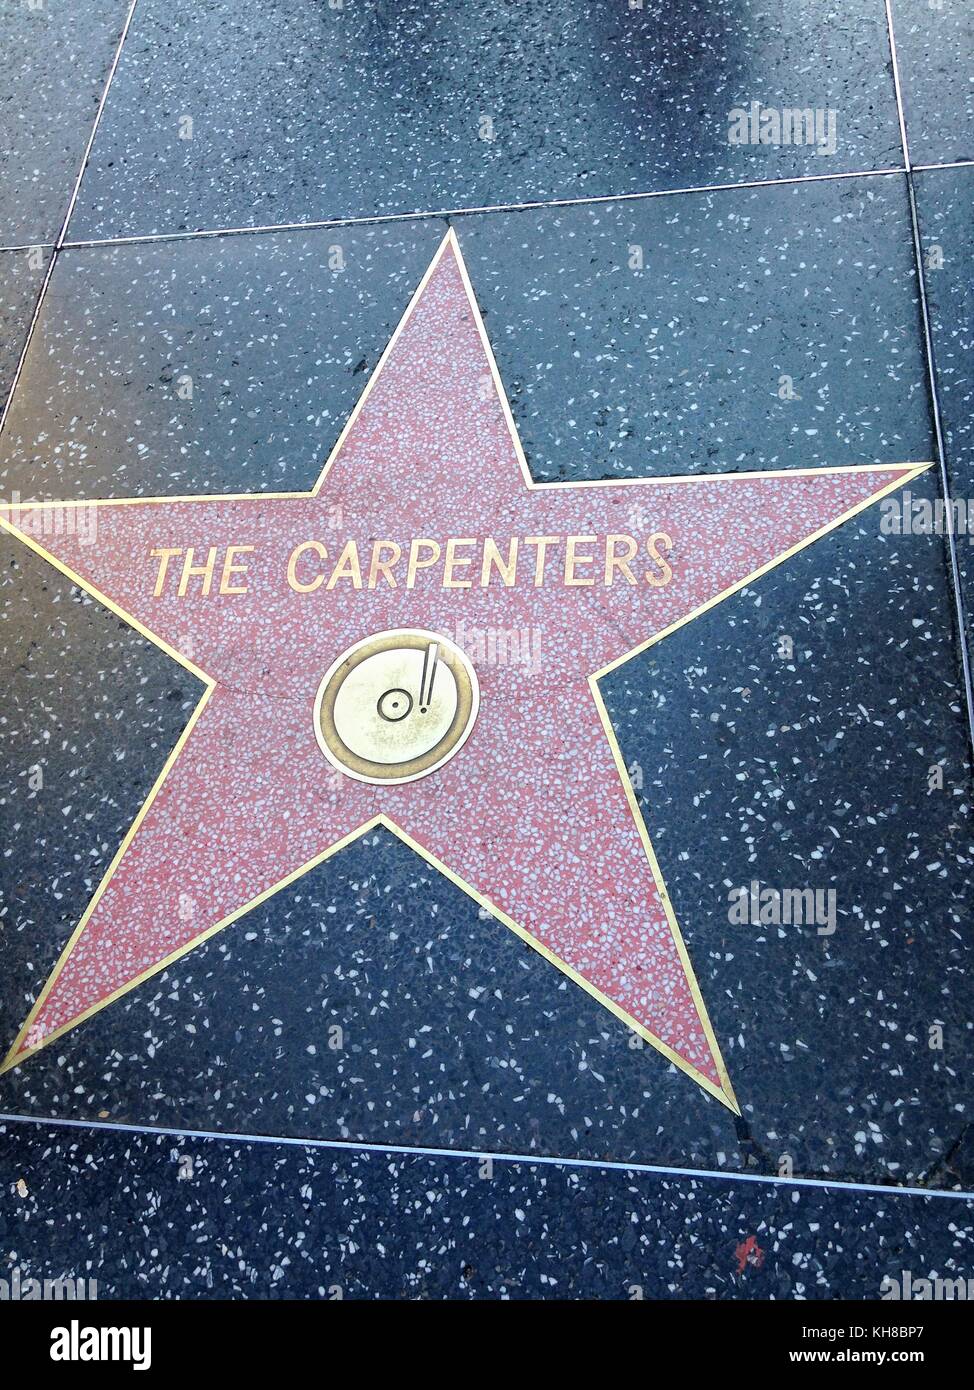 Hollywood, California - July 26 2017: The Carpenters Hollywood walk of fame star on July 26, 2017 in Hollywood, CA. American vocal and instrumental du Stock Photo